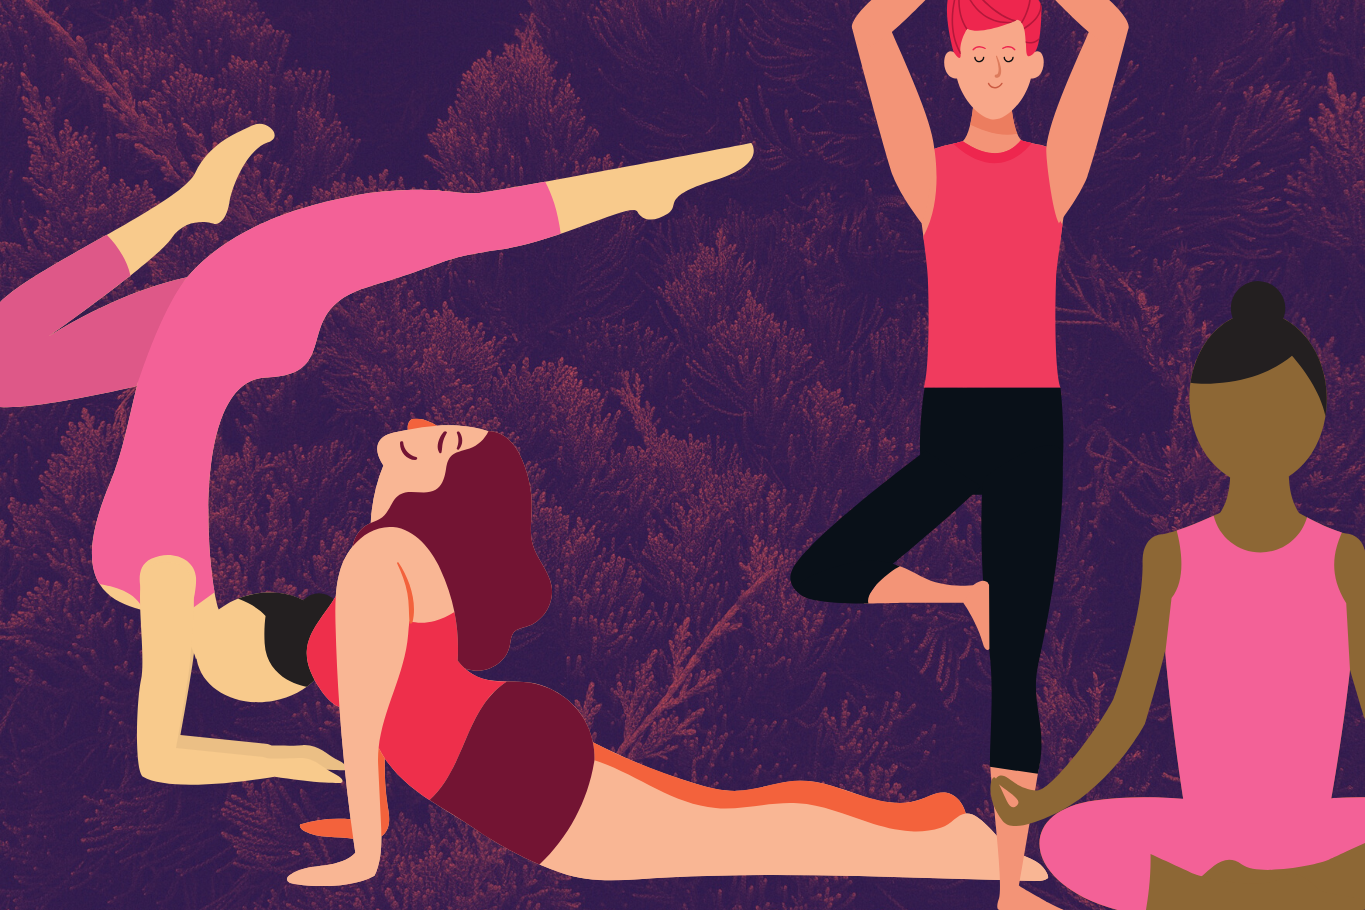 Digital illustration of people practising yoga poses against a purple background with red bush planting.